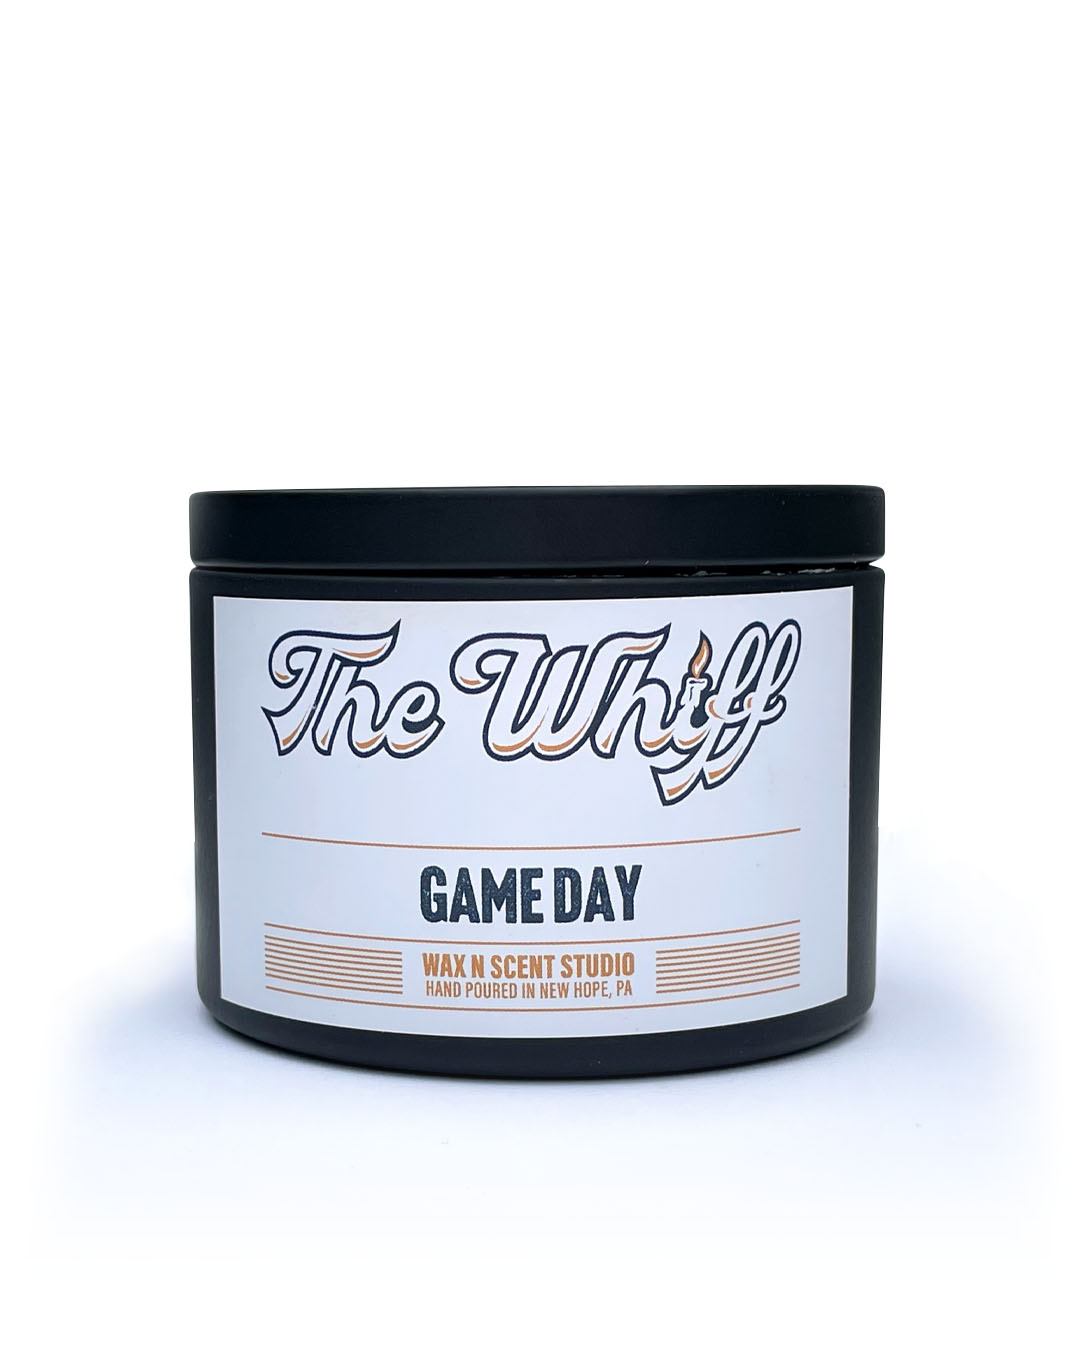 Gameday Candle